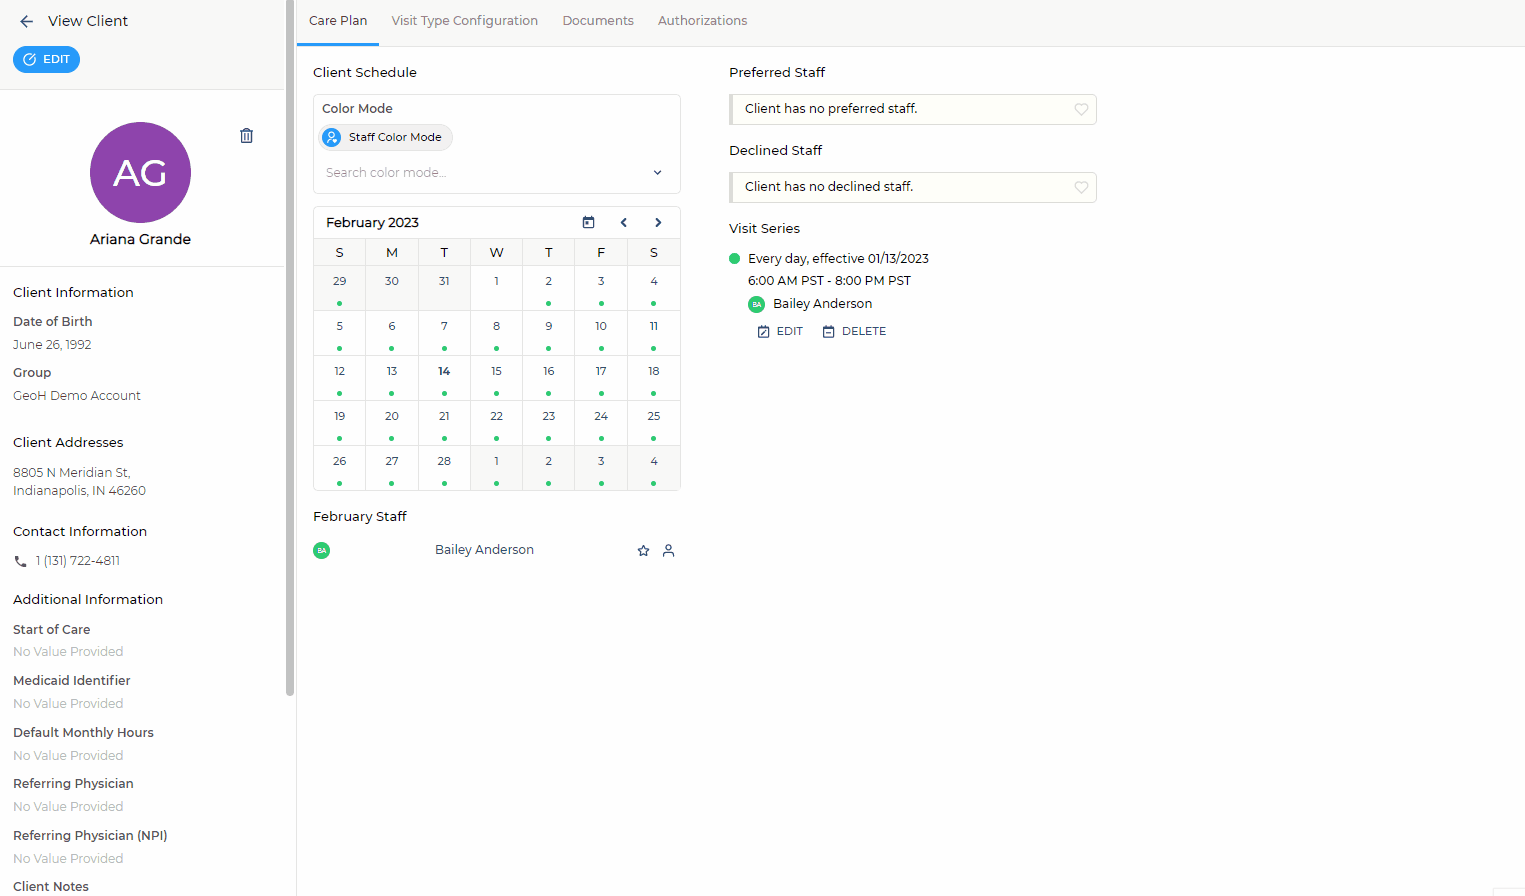 How do I add my client's diagnosis codes on their profile?